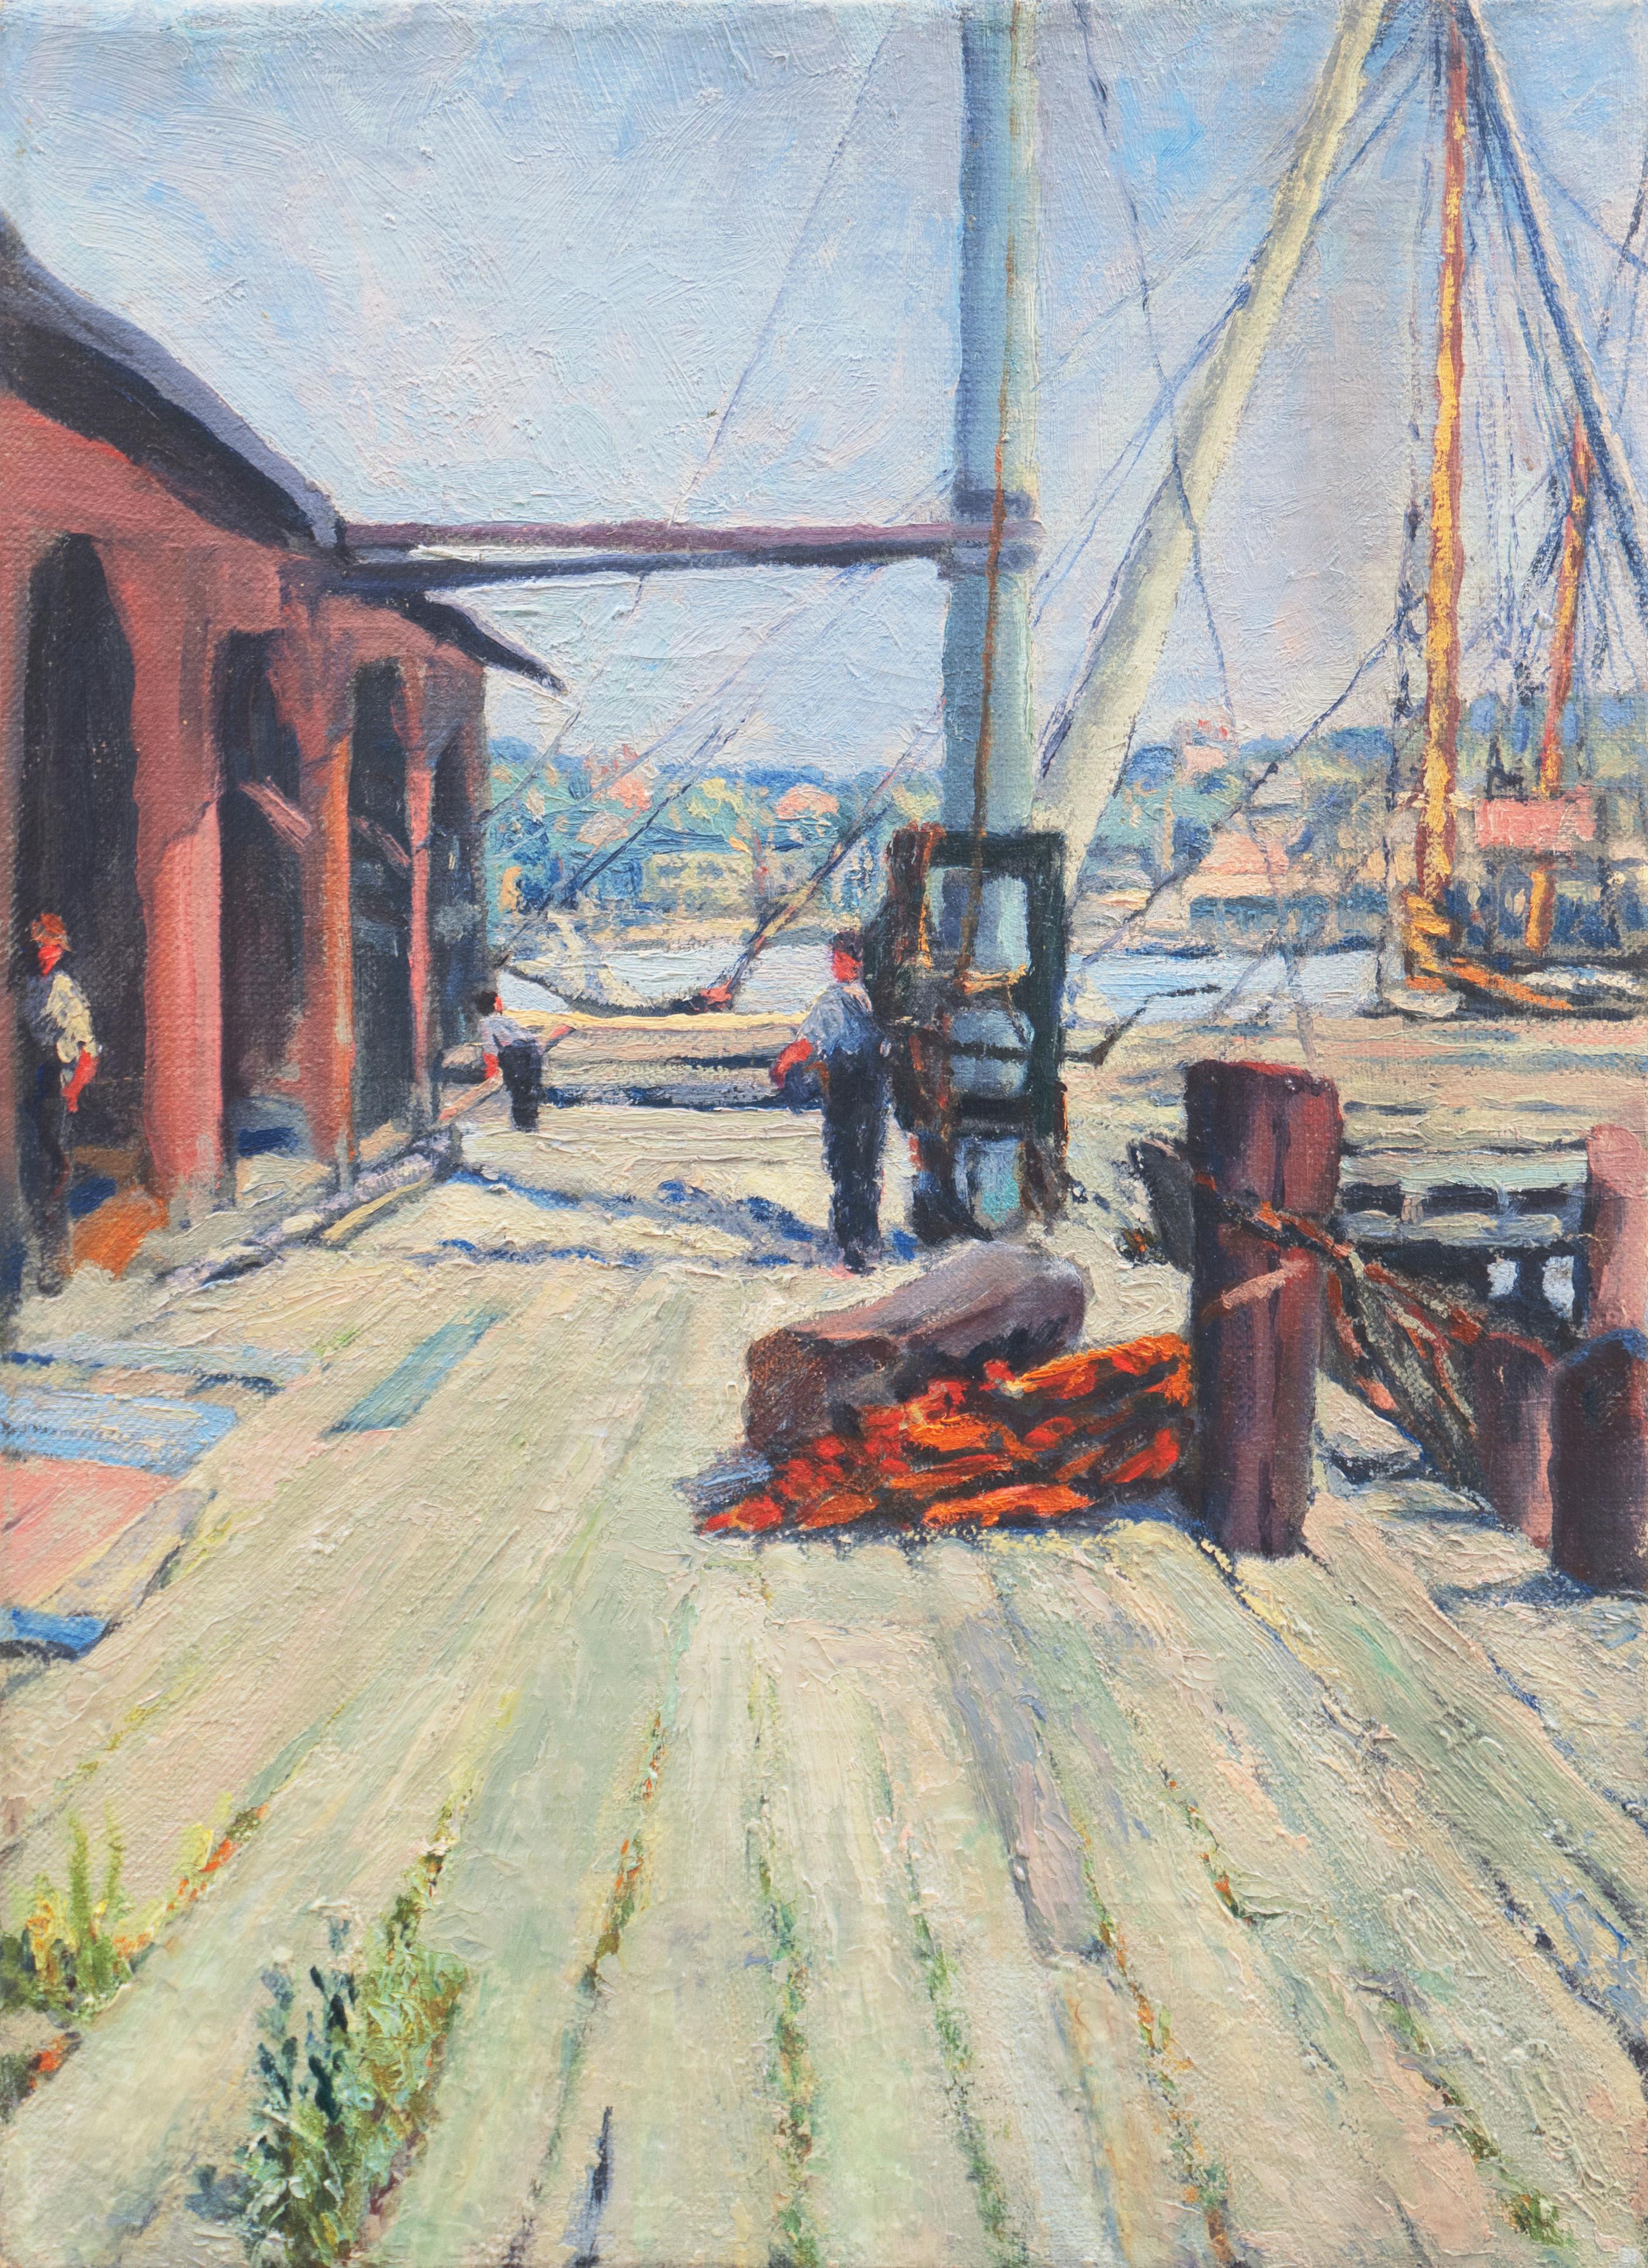 American School (20th century) Landscape Painting - 'Wharf with Dock Workers', American School, Oakland, San Francisco Bay Area Oil